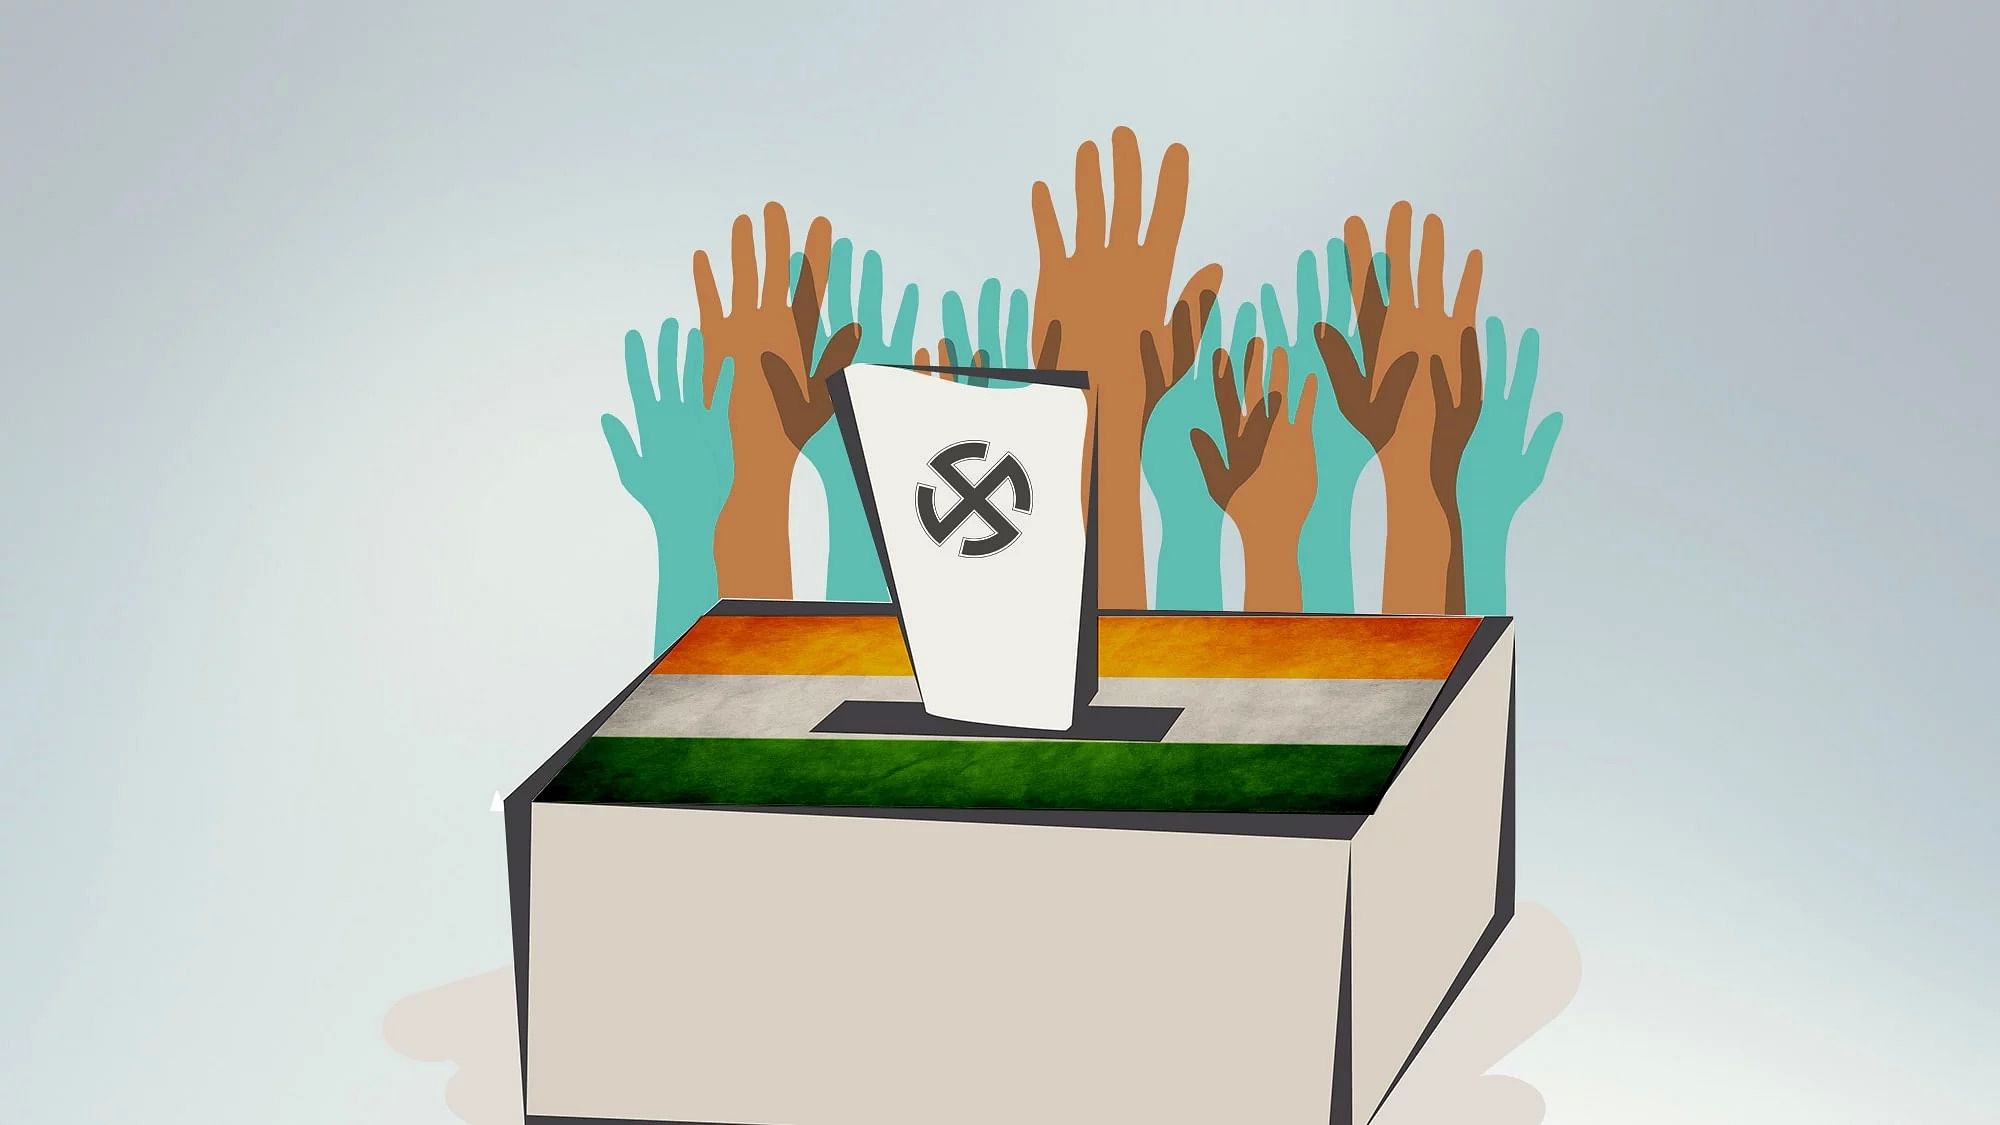 Around 1,066 candidates are contesting across 70 seats in the first phase of Bihar elections.